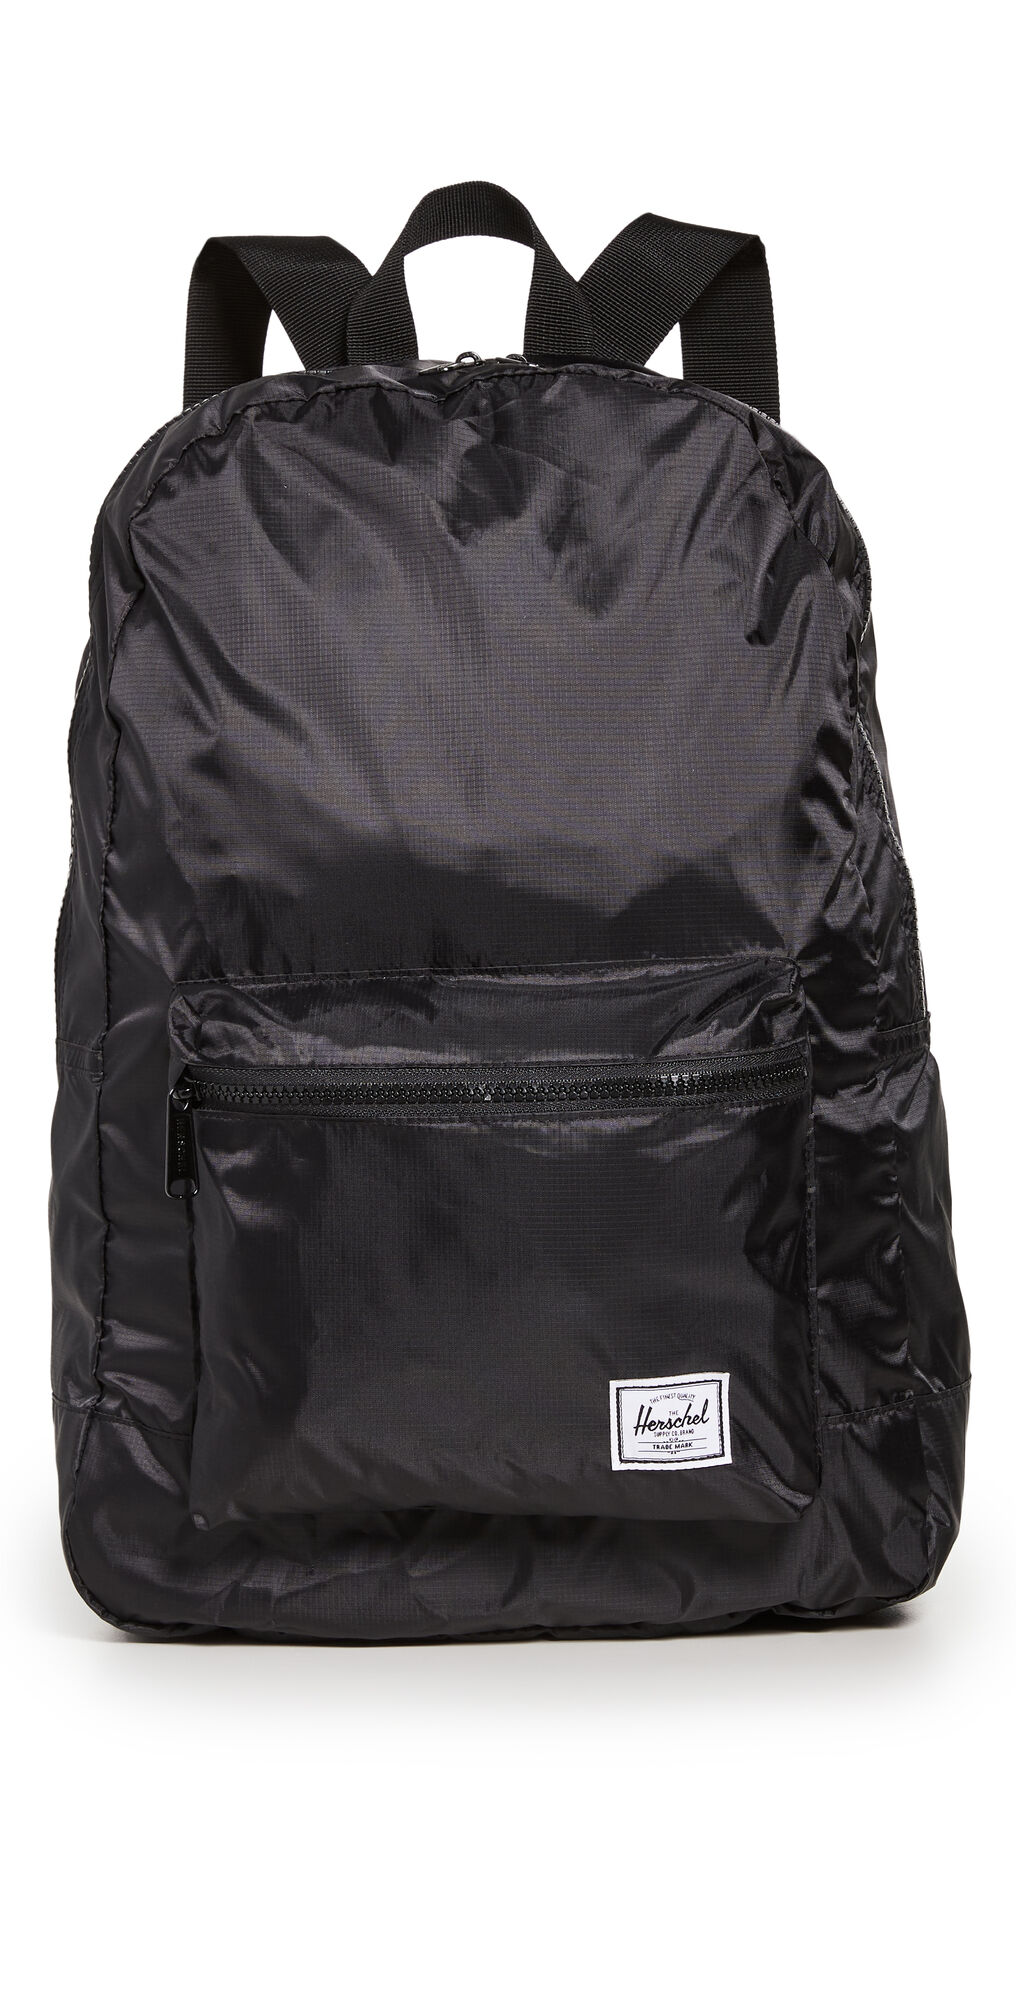 Herschel Supply Co. Packable Daypack Backpack Black One Size  Black  size:One Size